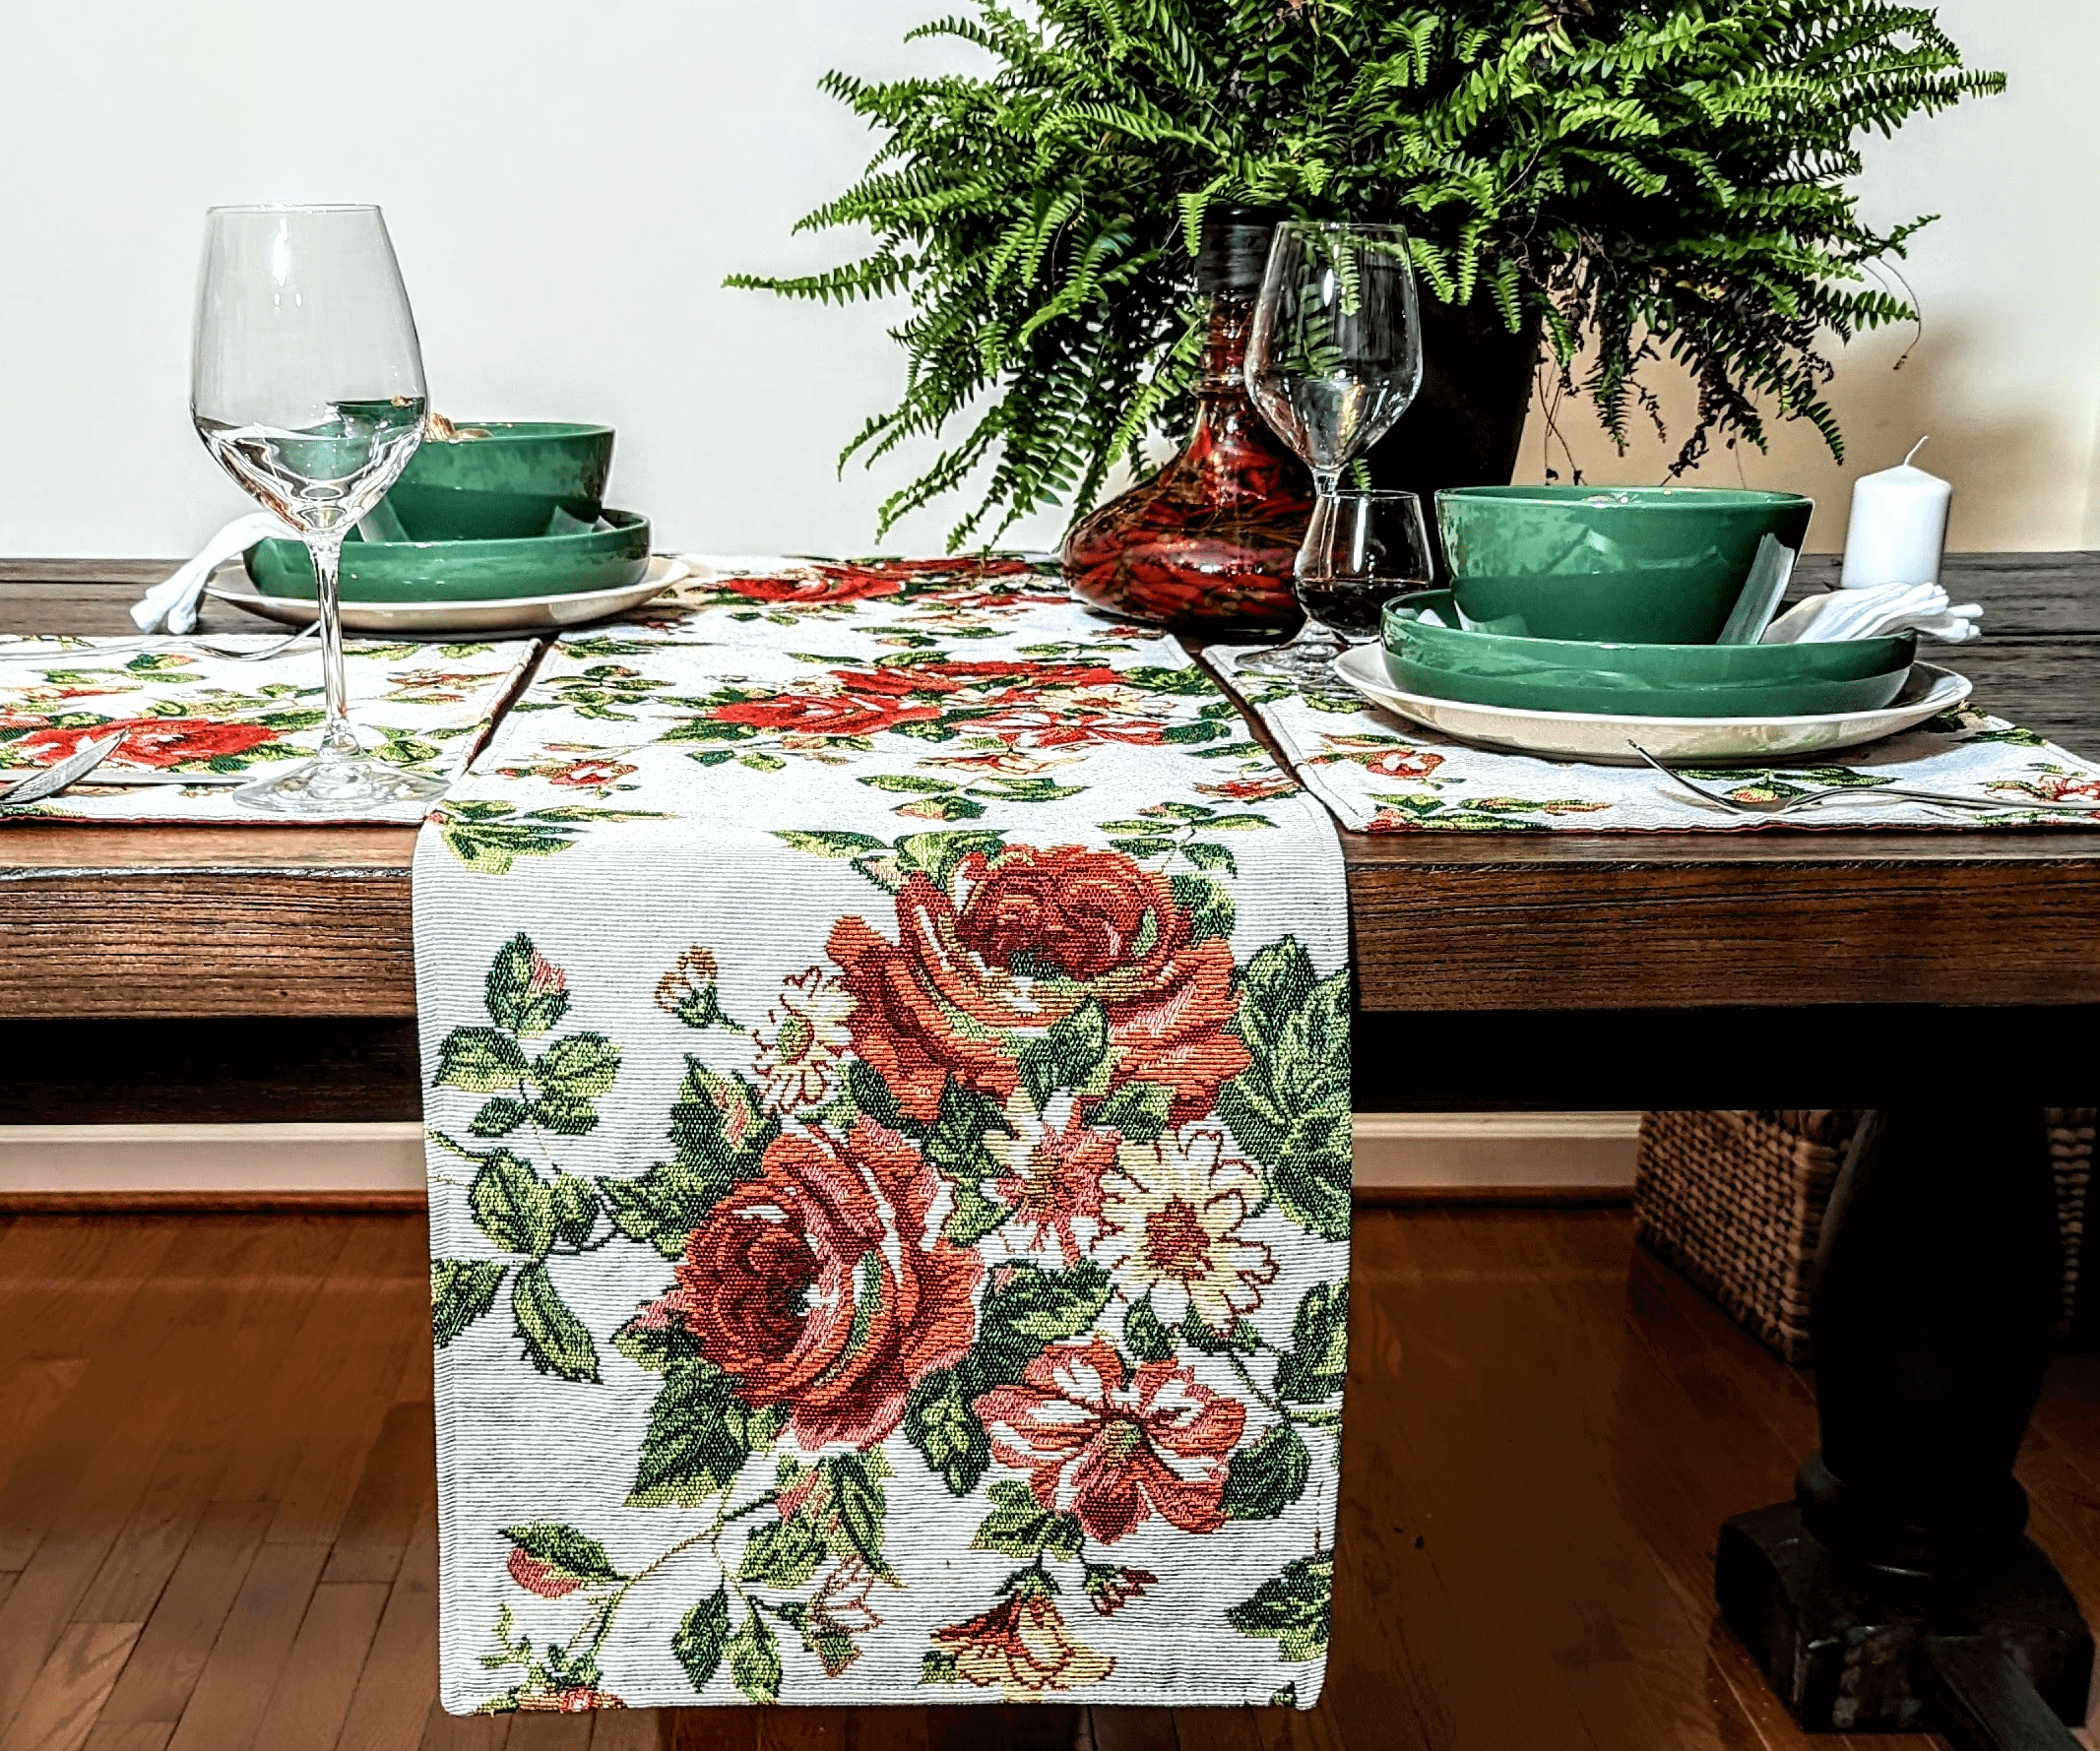 Spring Summer Floral Red Rose Flower Country Cottage Victorian Dining Room Kitchen Tapestry Table runner coffee table cover scarf mothers day gift idea